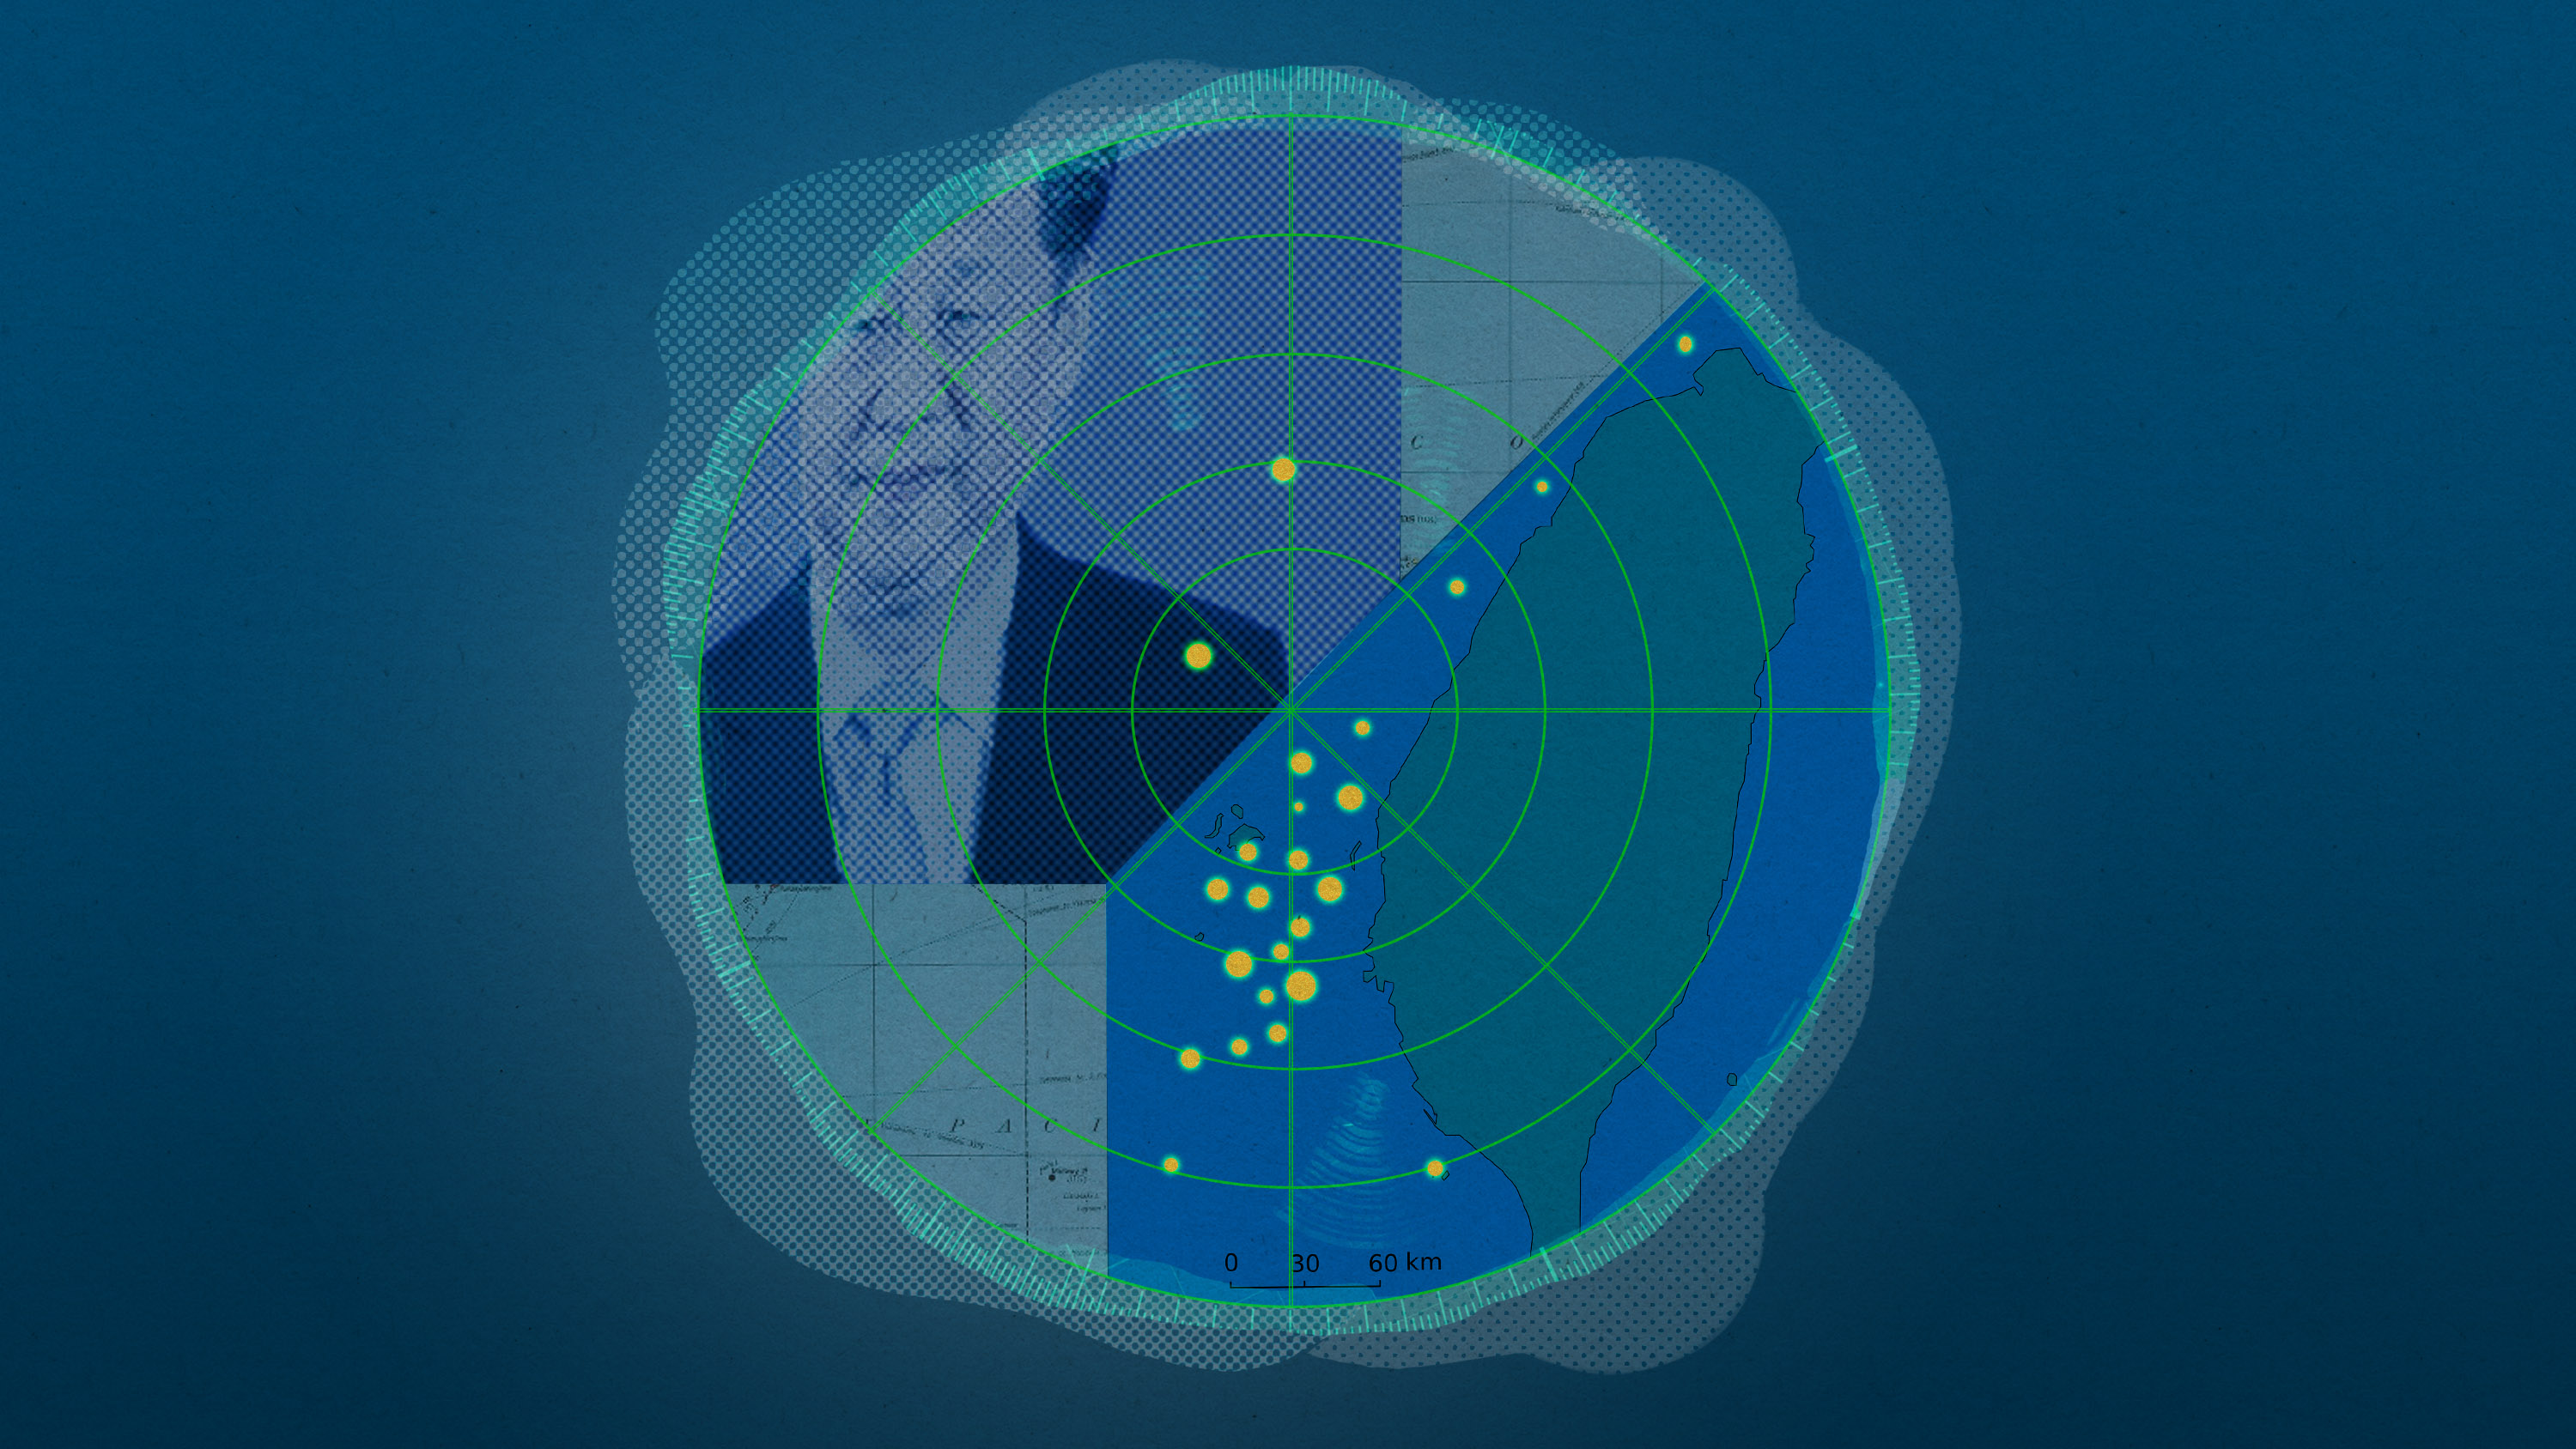 sonar reading a swarm of objects around a map of Taiwan with Xi Jinping to the northwest